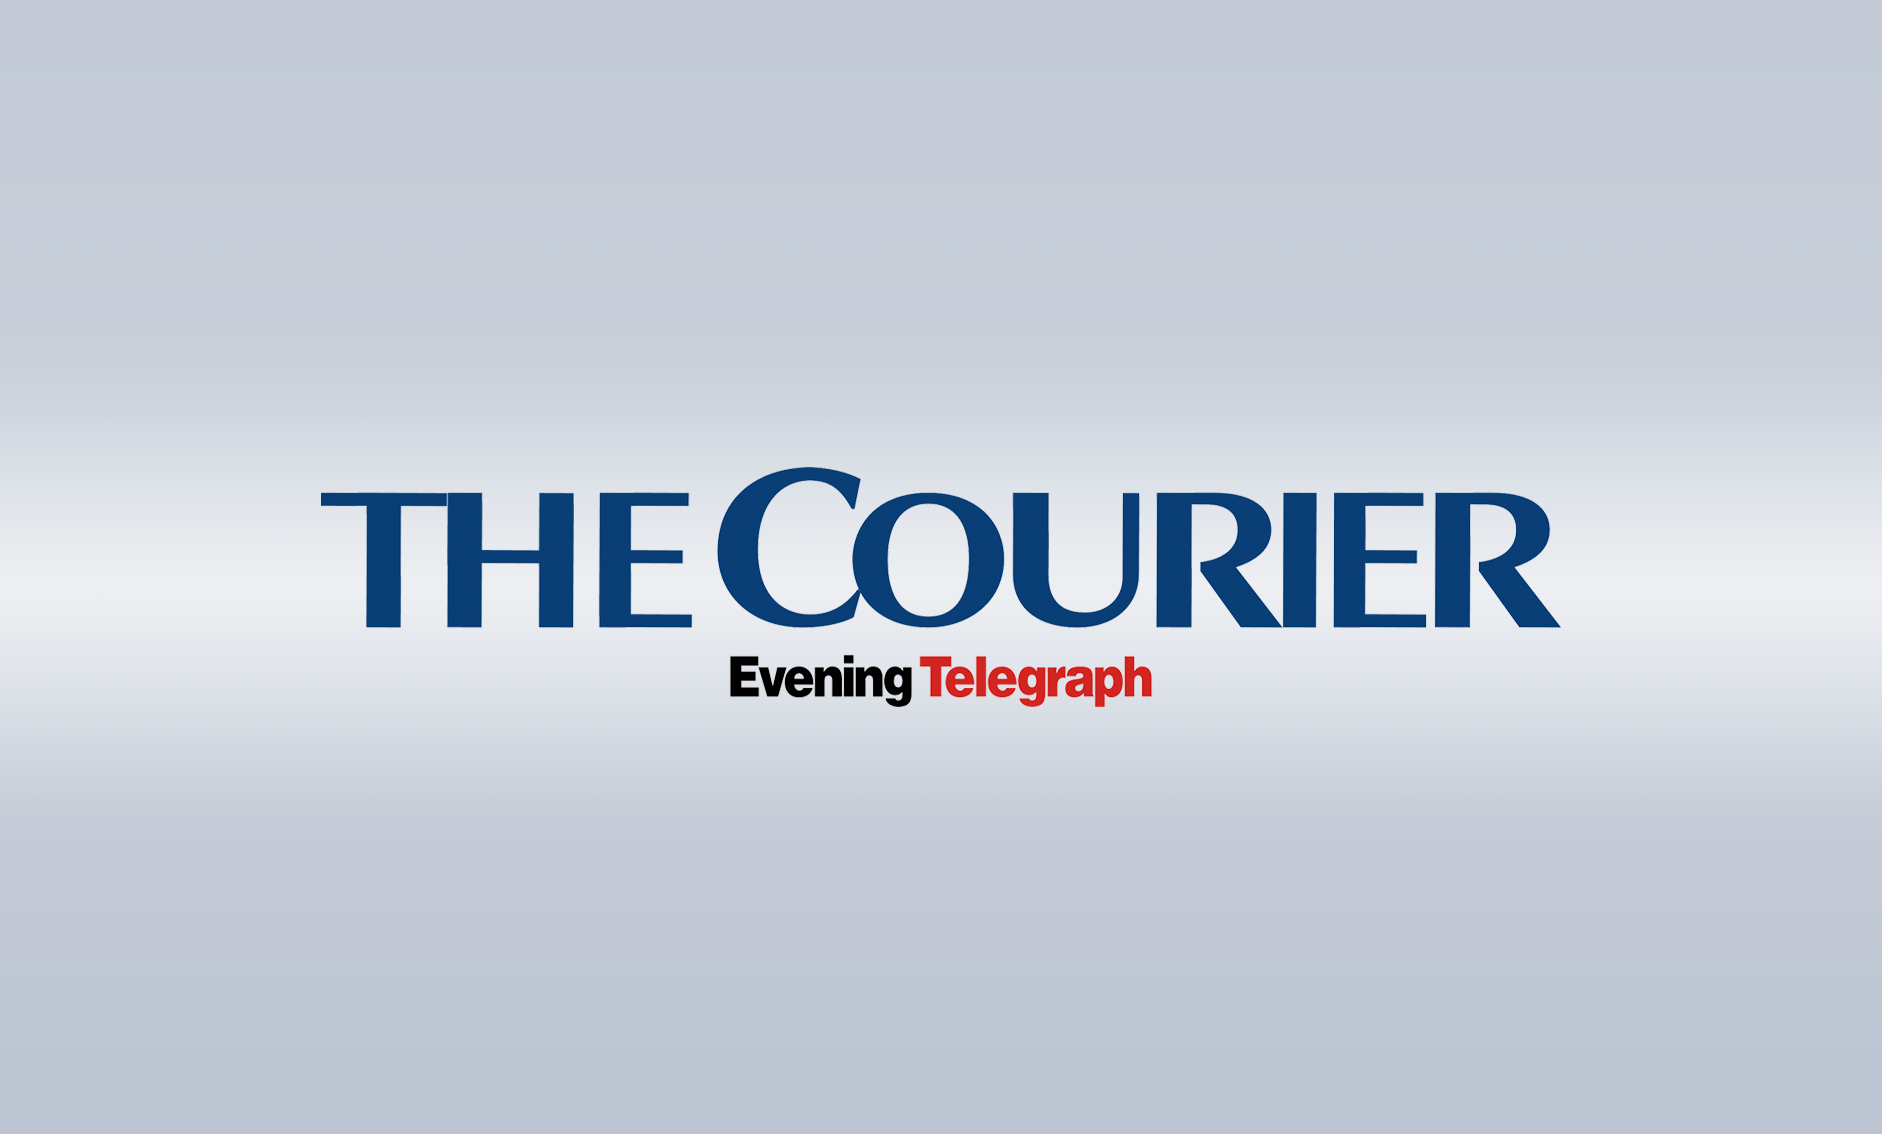 Coming up in Monday’s Courier